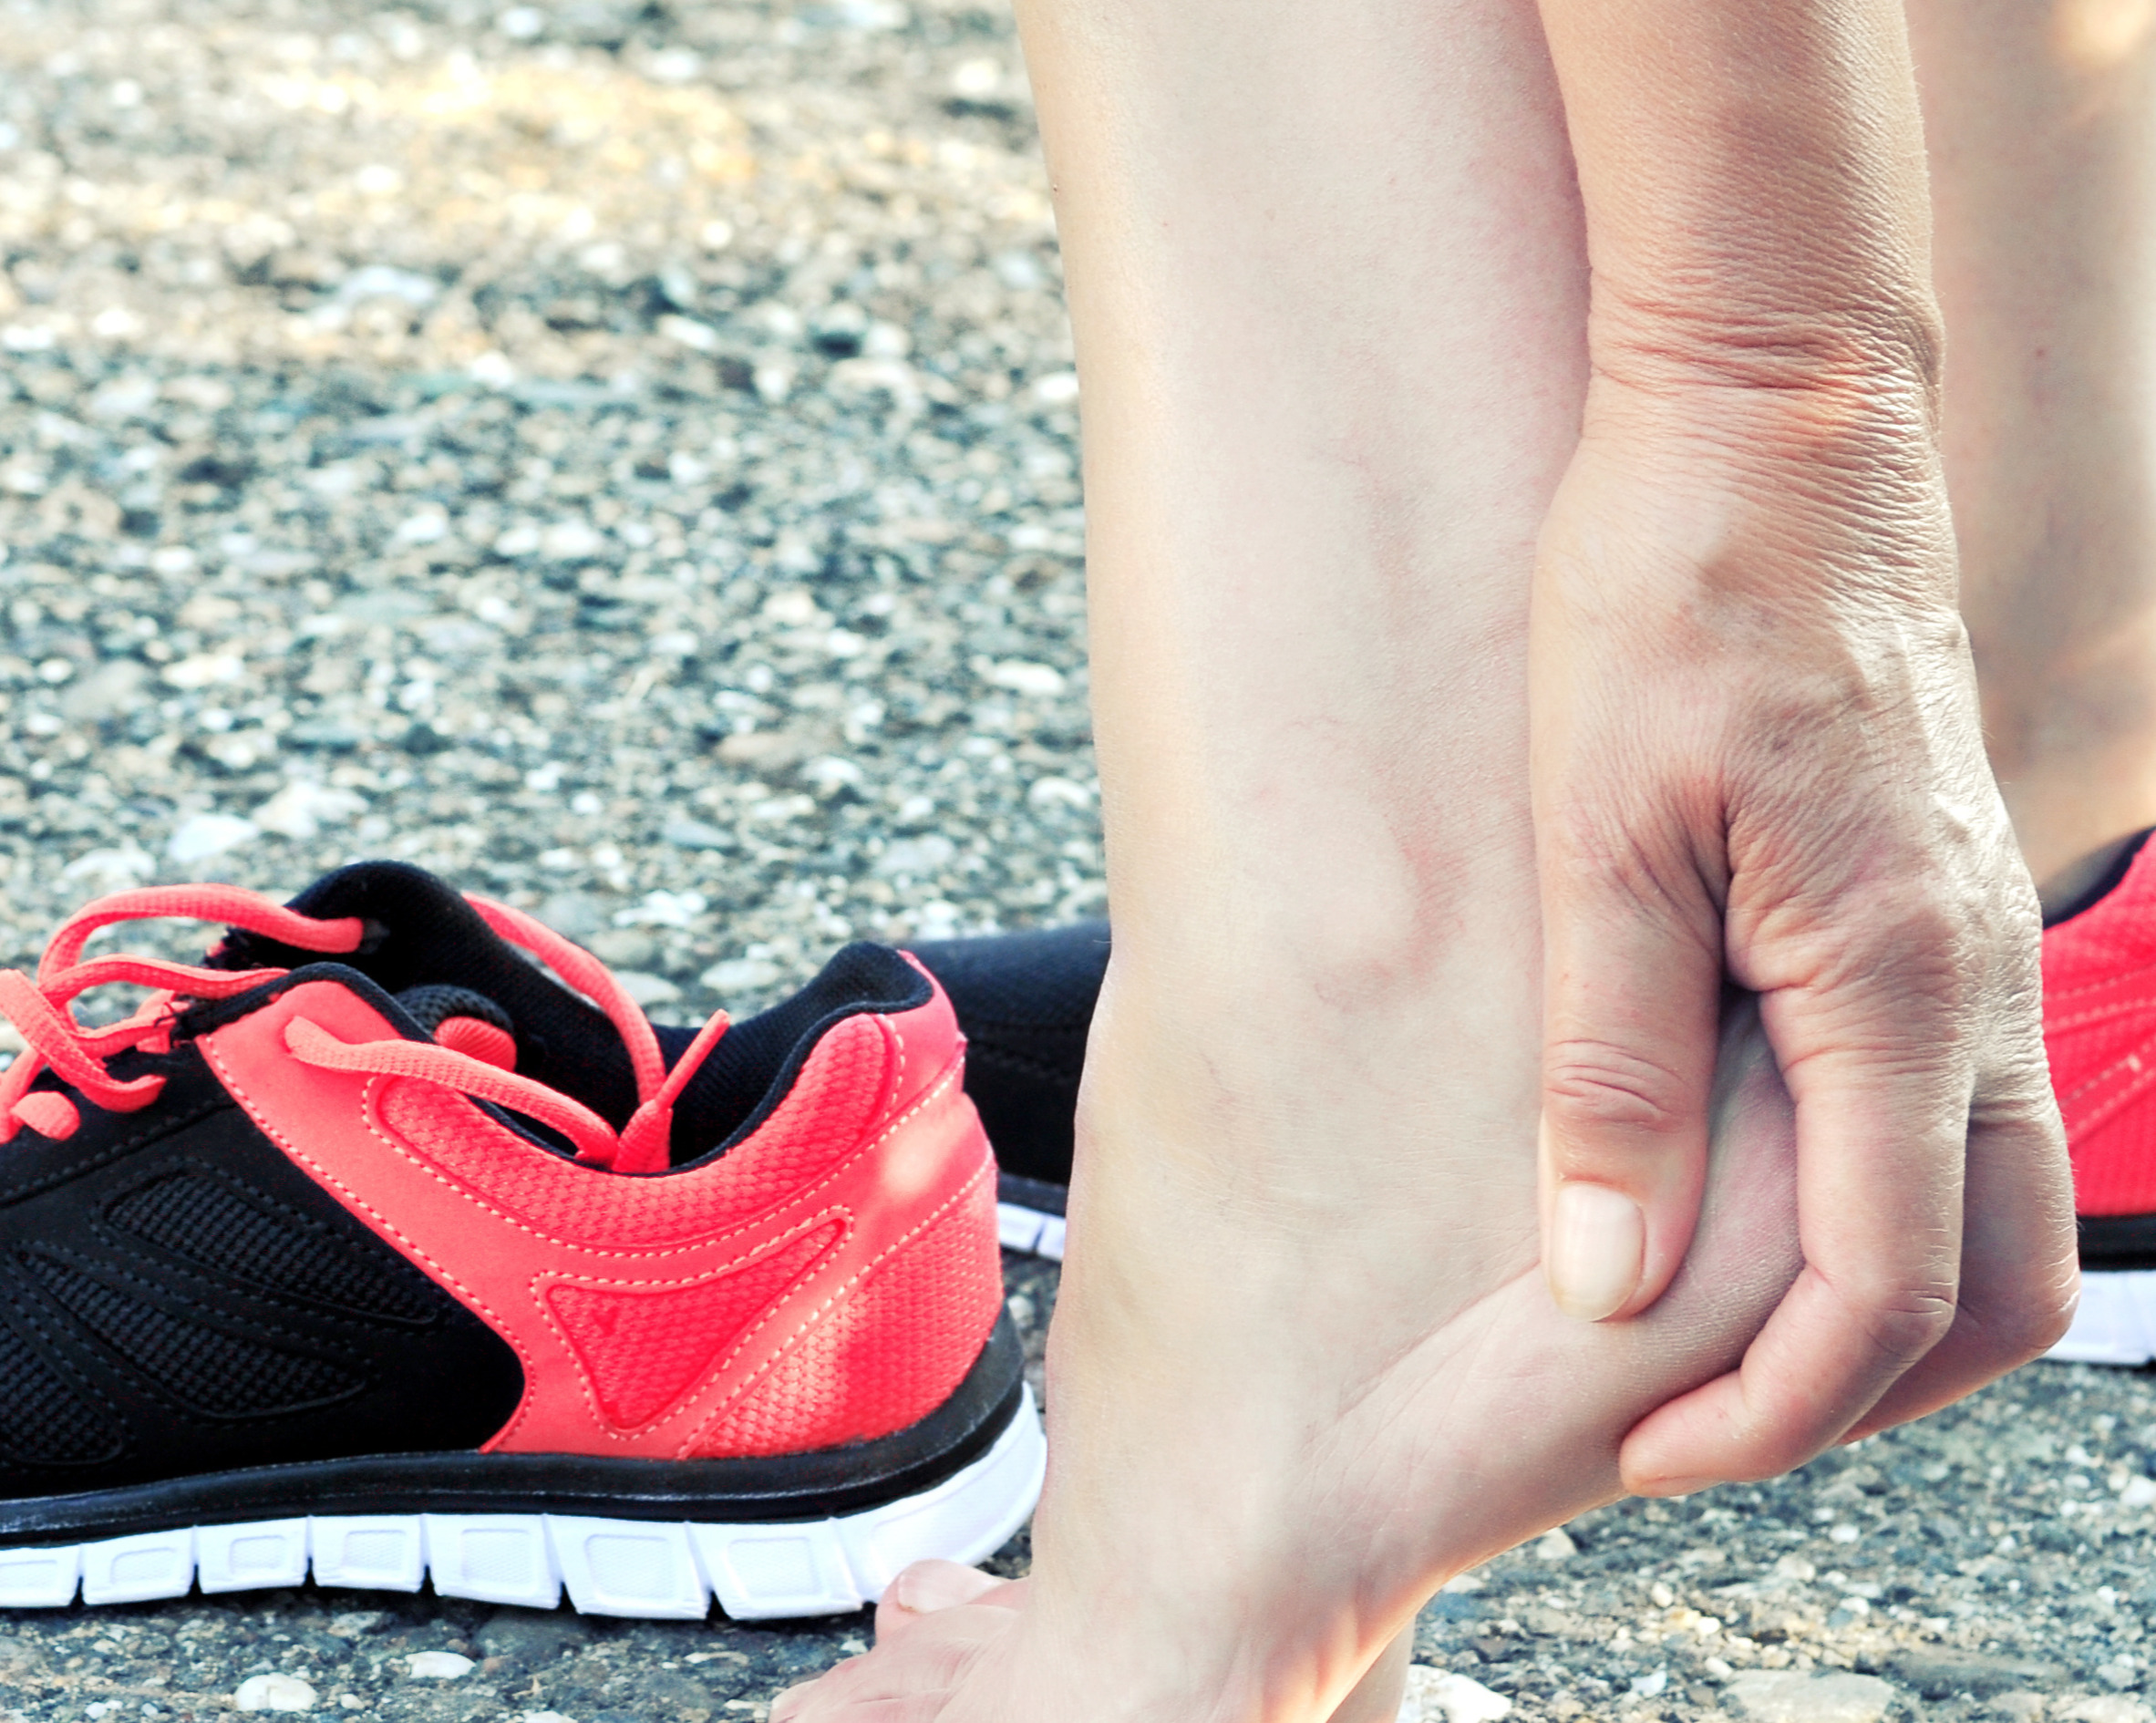 Heel Pain With Running – Best Treatment & Exercise For Plantar